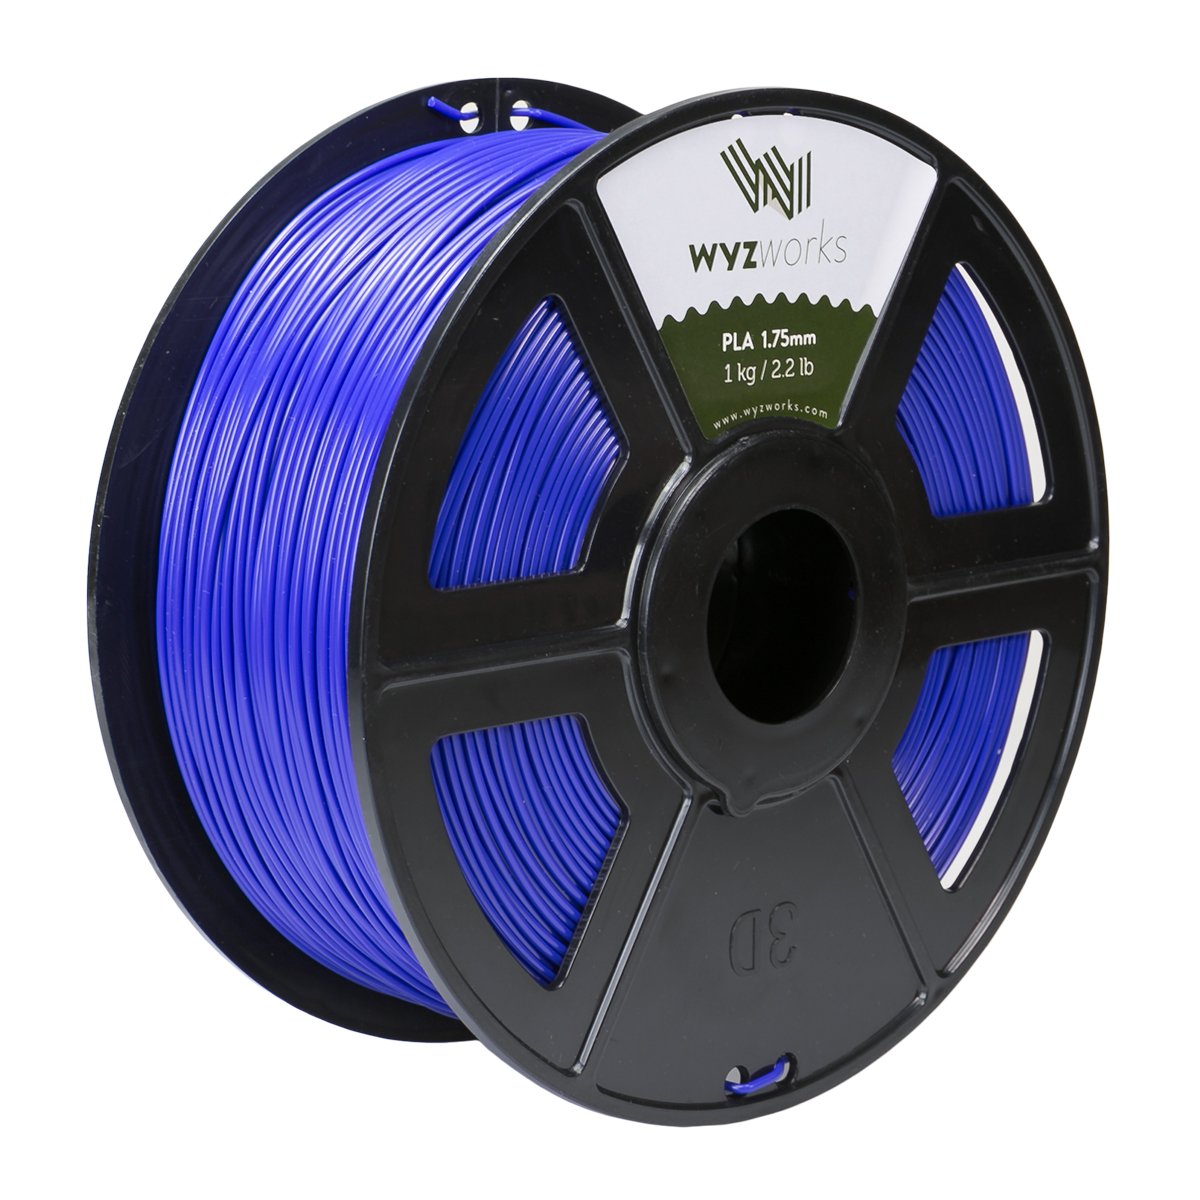 WYZworks PLA 1.75mm [ VIOLET ] Premium Thermoplastic Polylactic Acid 3D Printer Filament - Dimensional Accuracy +/- 0.05mm 1kg / 2.2lb + [ Multiple Color Options Available ]